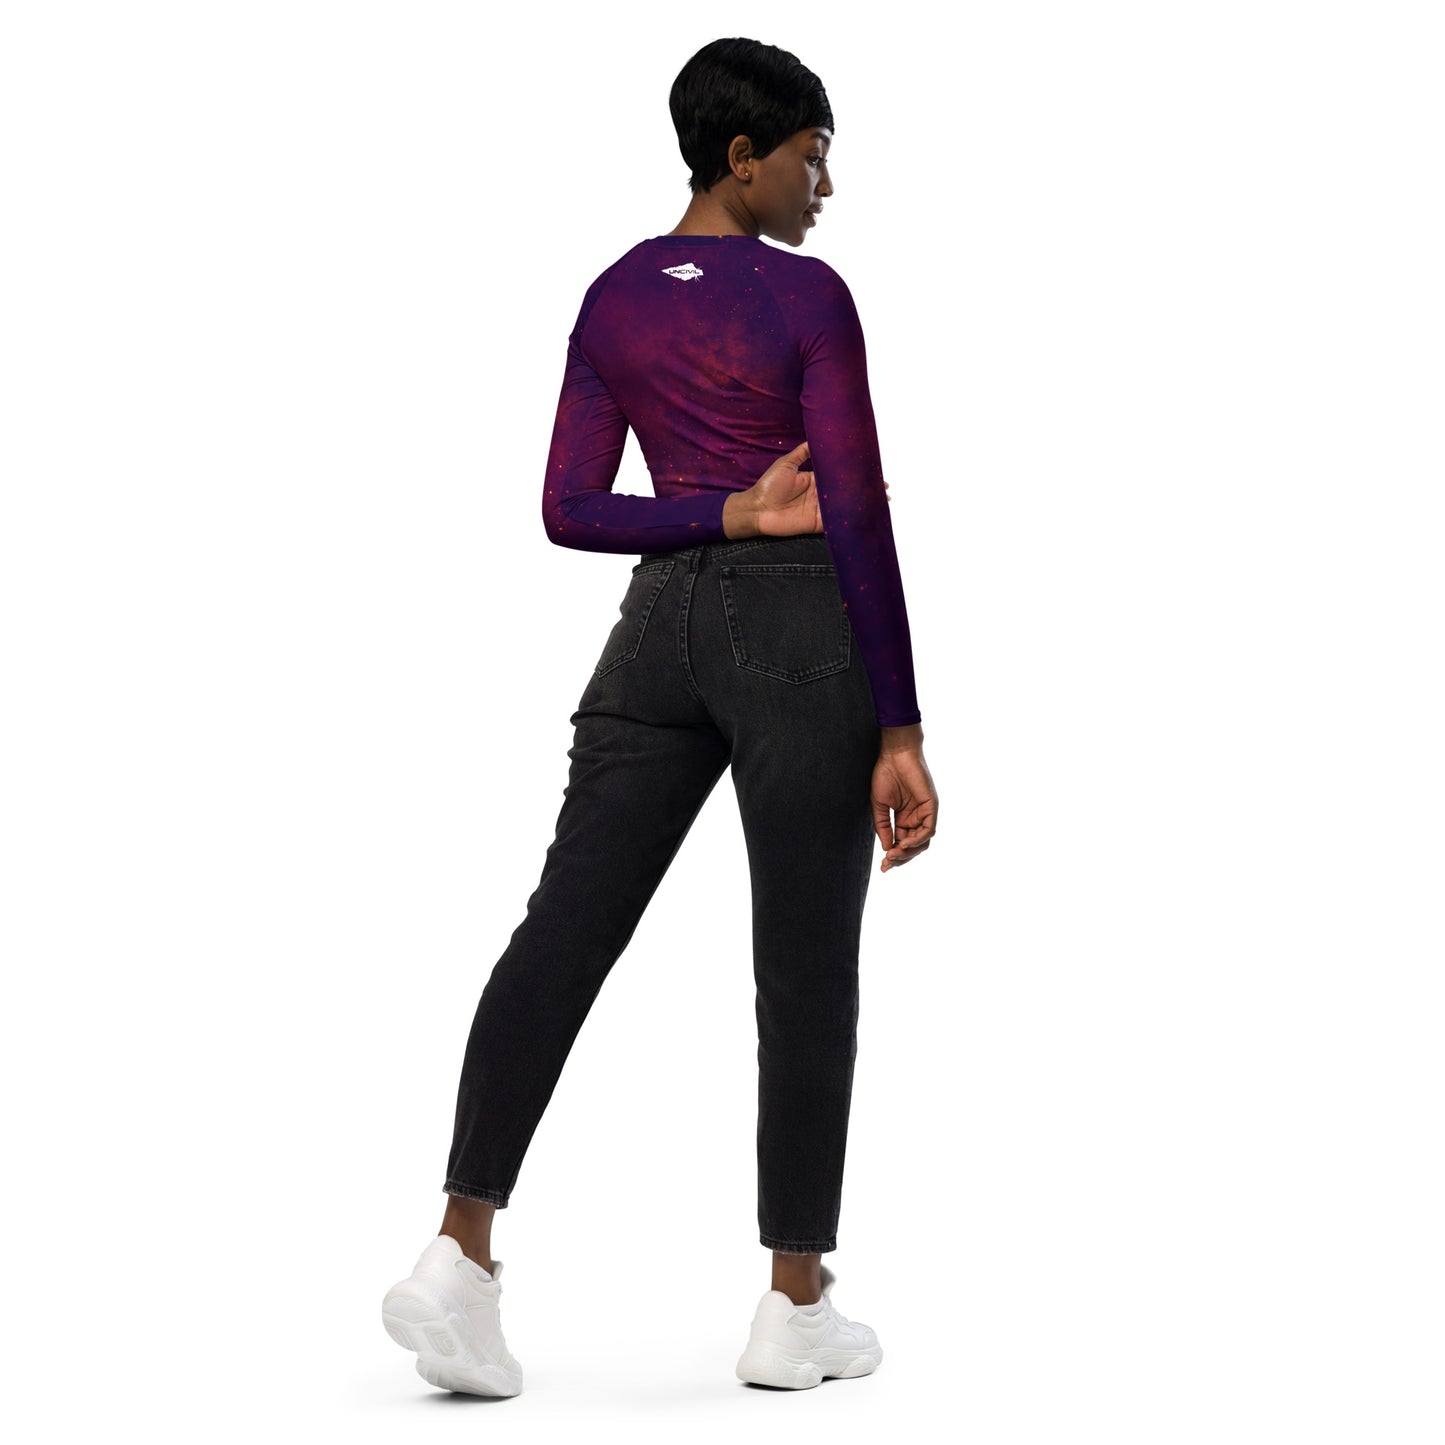 Astro long-sleeve crop top for women is made of recycled polyester and elastane, making it an eco-friendly choice for swimming, sports, or athleisure. UPF 50+.